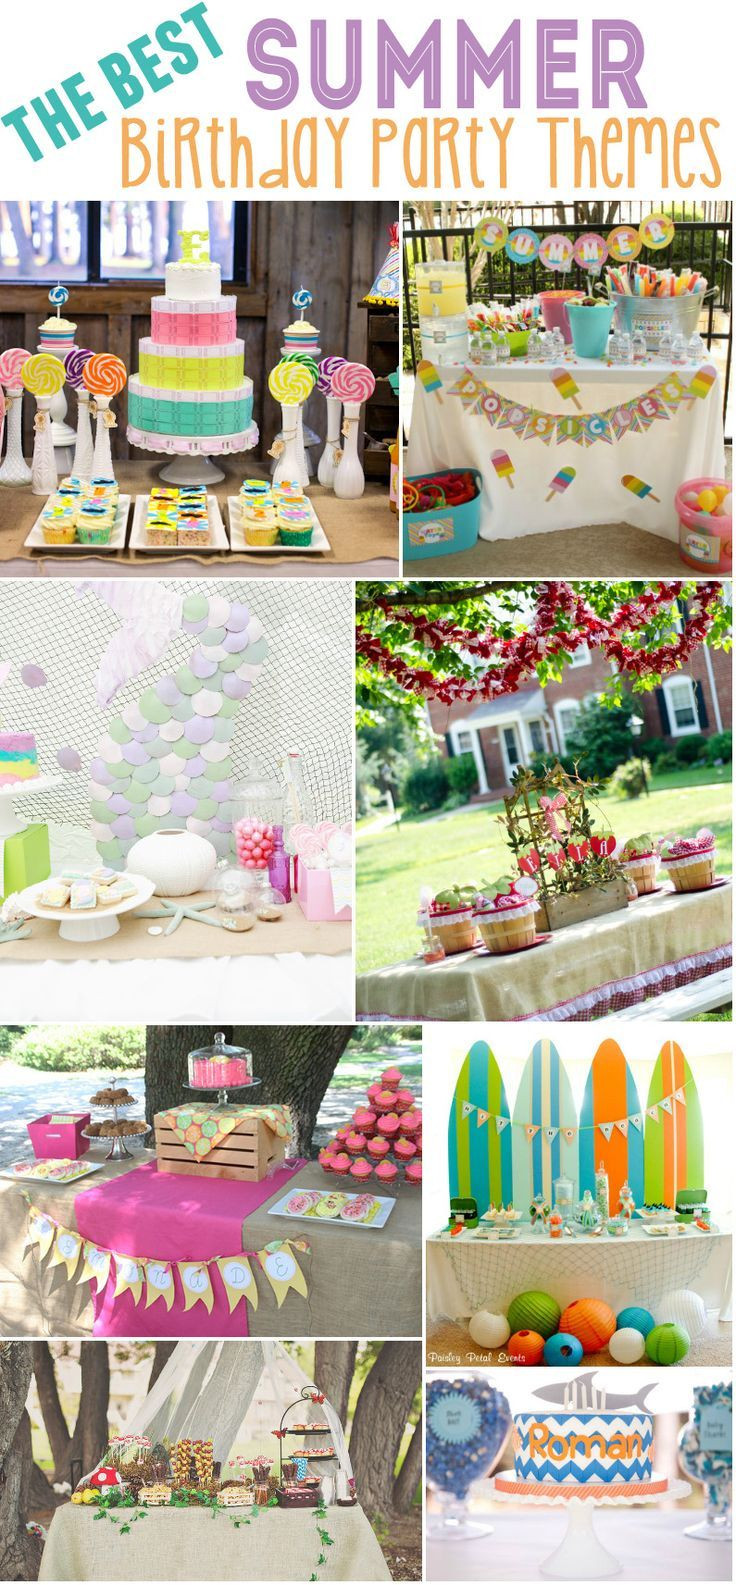 Good Summer Party Ideas
 15 Best Summer Birthday Party Themes